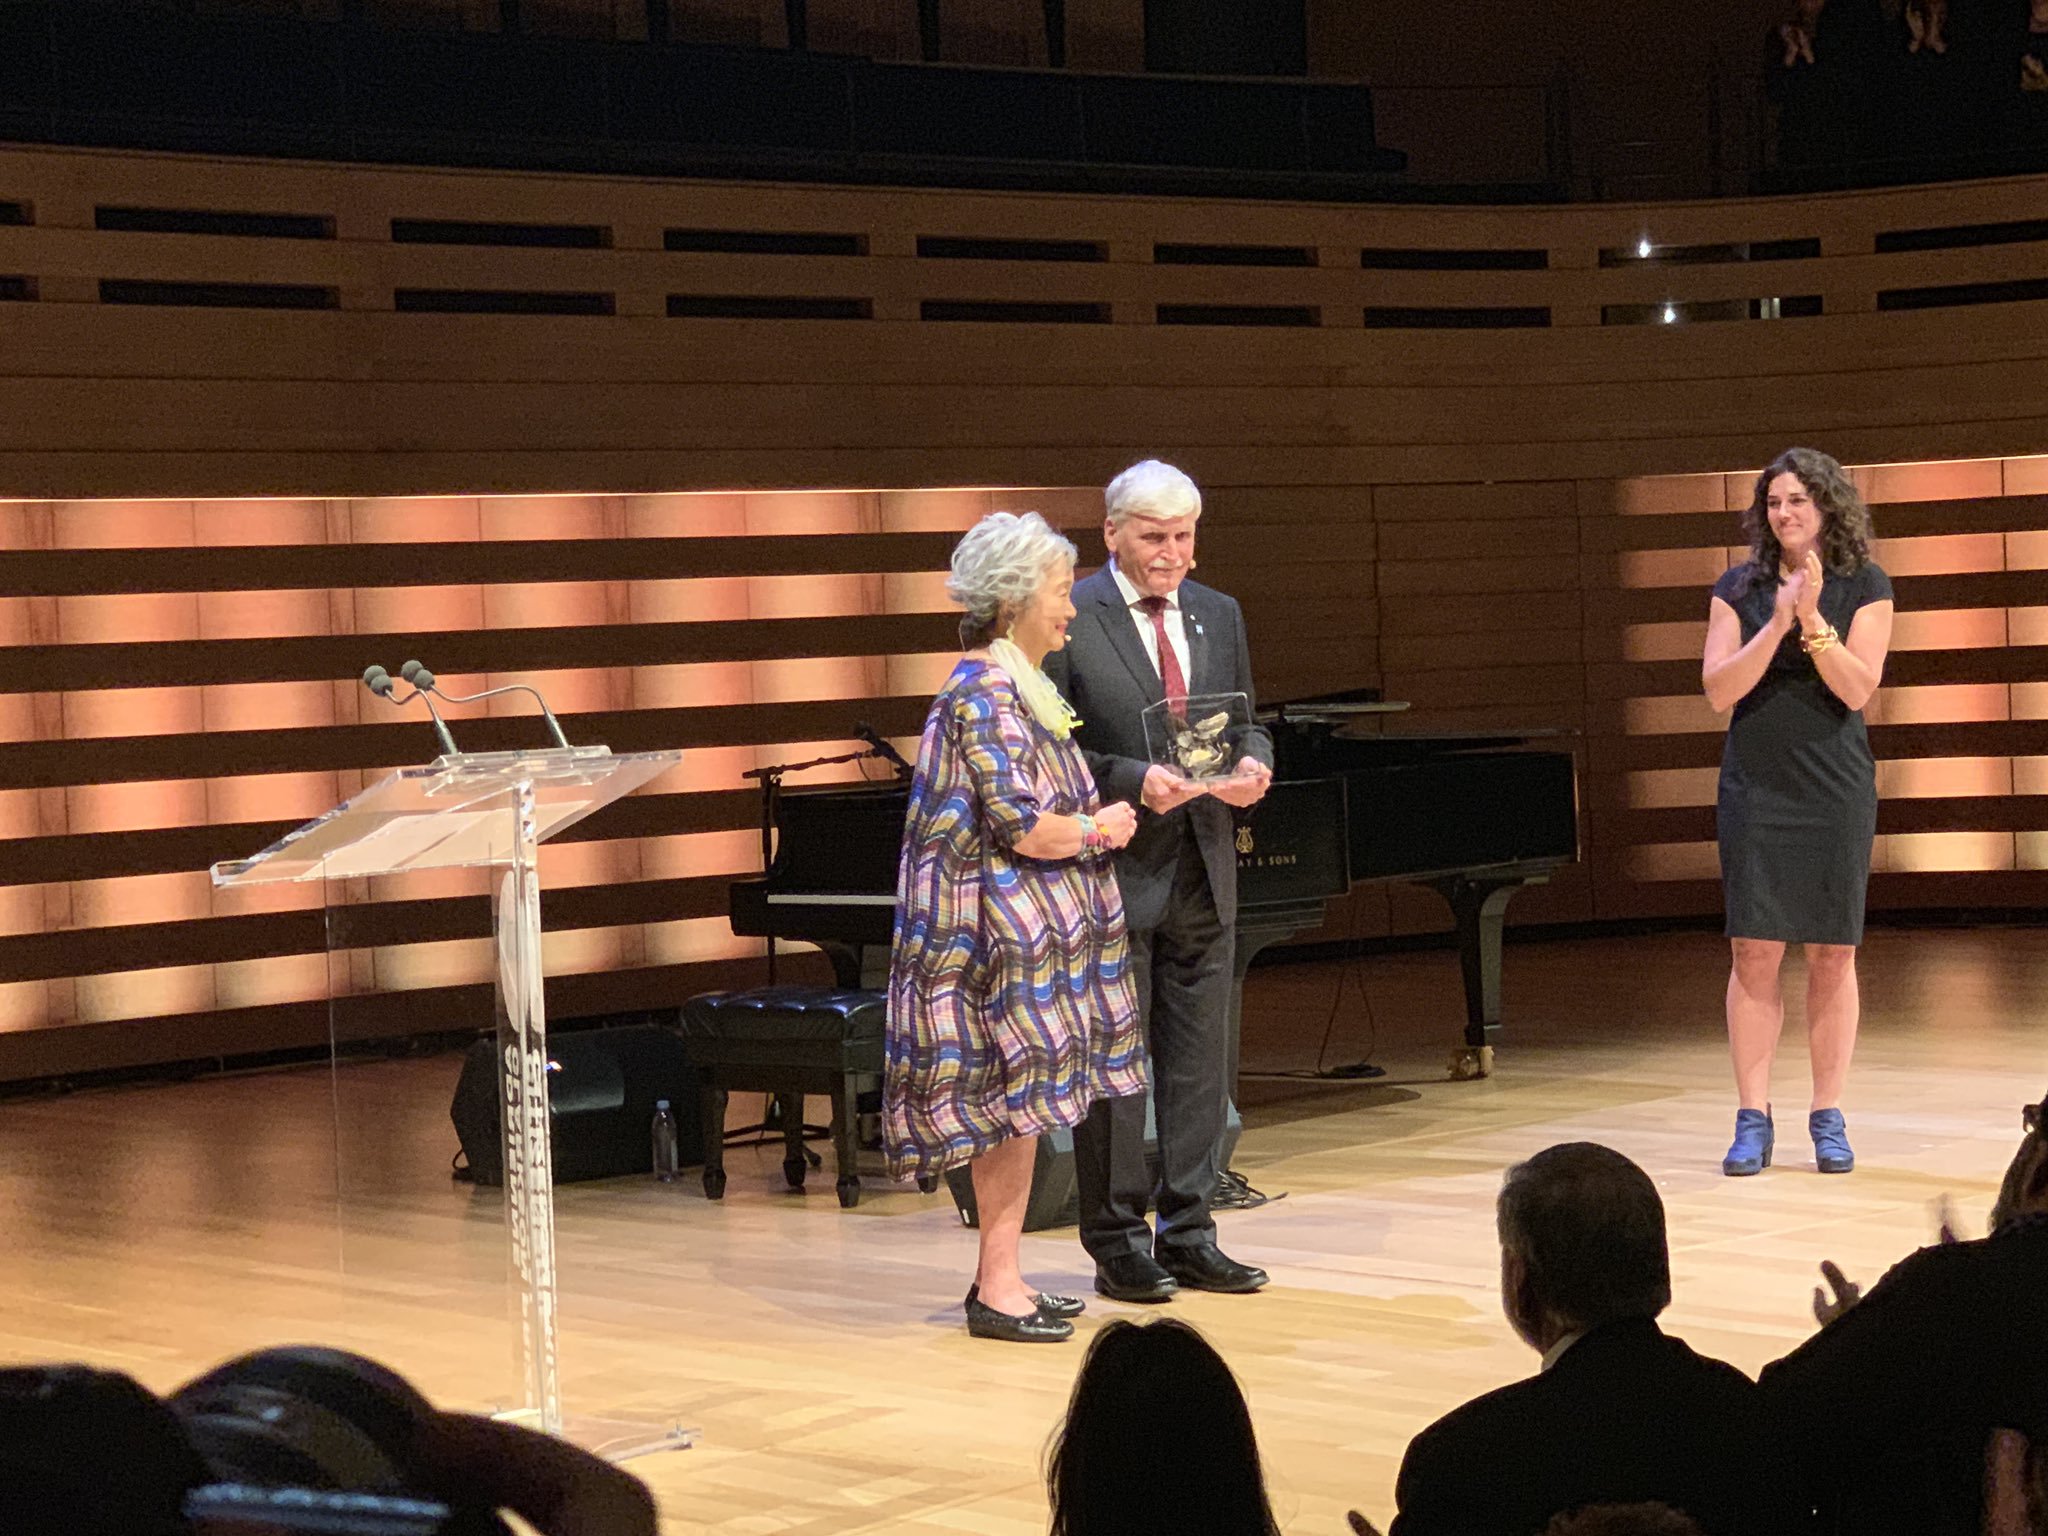 Dallaire, received the award in Toronto, Canada on Wednesday.